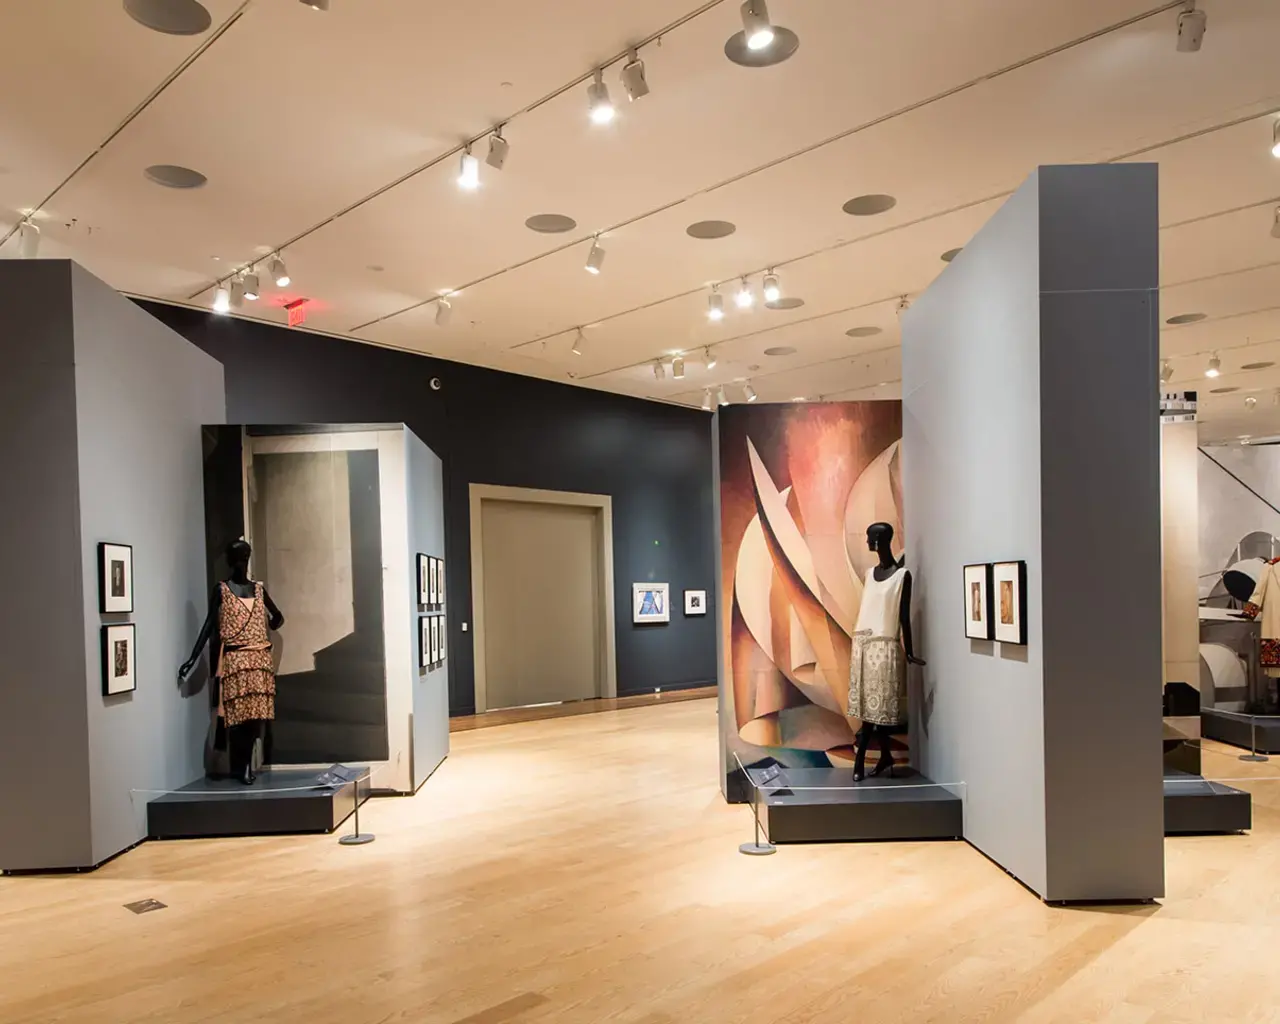 Charles Sheeler: Fashion, Photography, and Sculptural Form, installation view, James A. Michener Art Museum, 2016. Photo by Dara N. King.